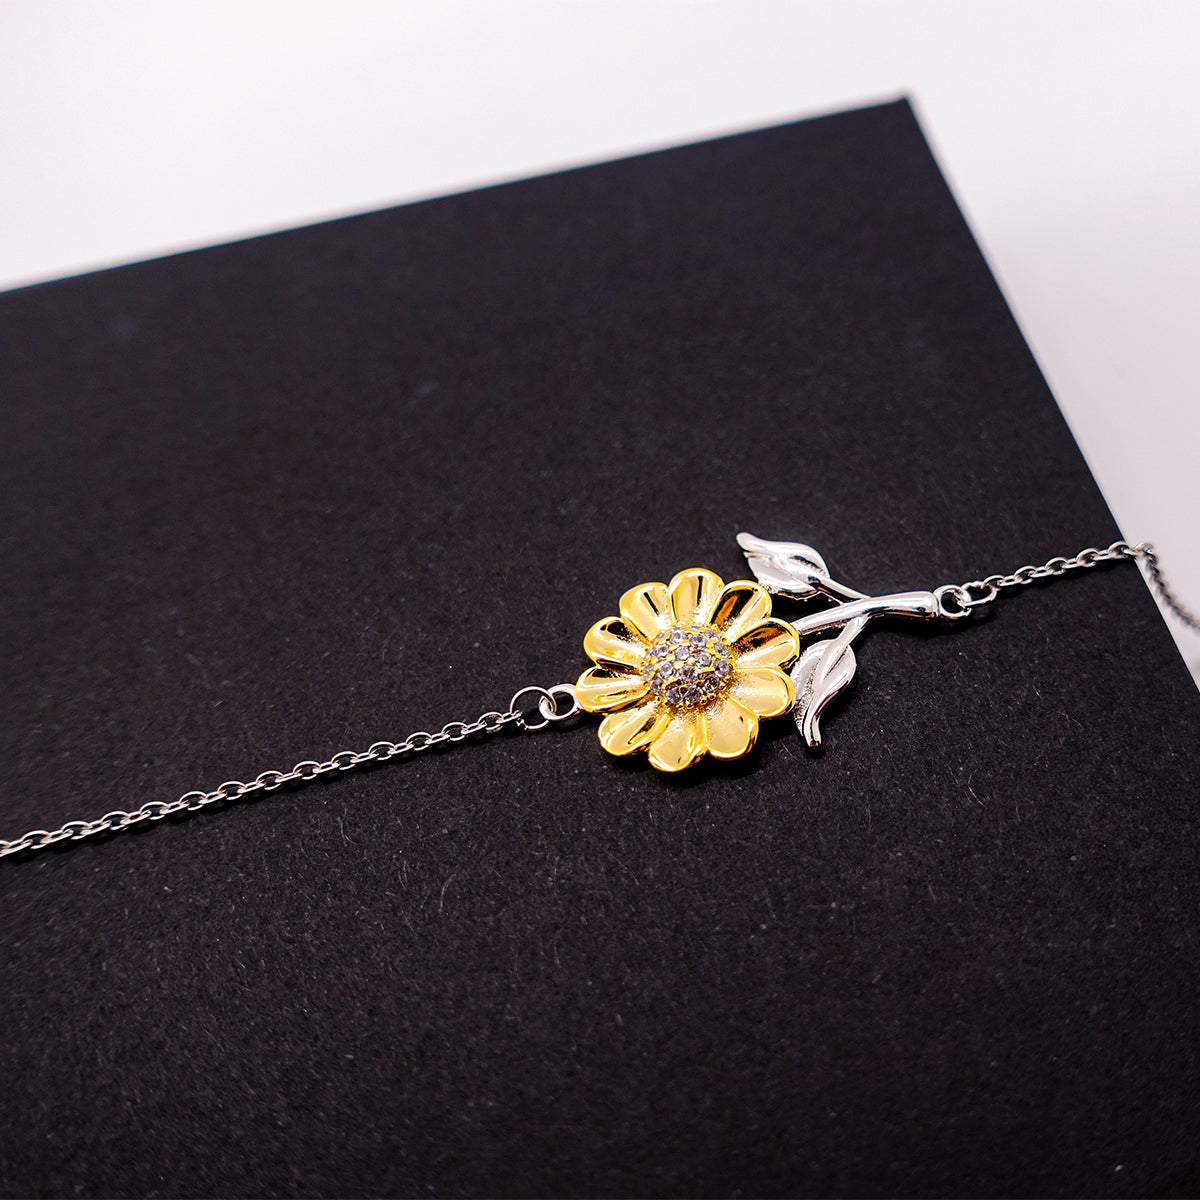 Future Aerospace Engineer Gifts, May your path be filled with moments of insight, Graduation Gifts for New Aerospace Engineer, Christmas Unique Sunflower Bracelet For Men, Women, Friends